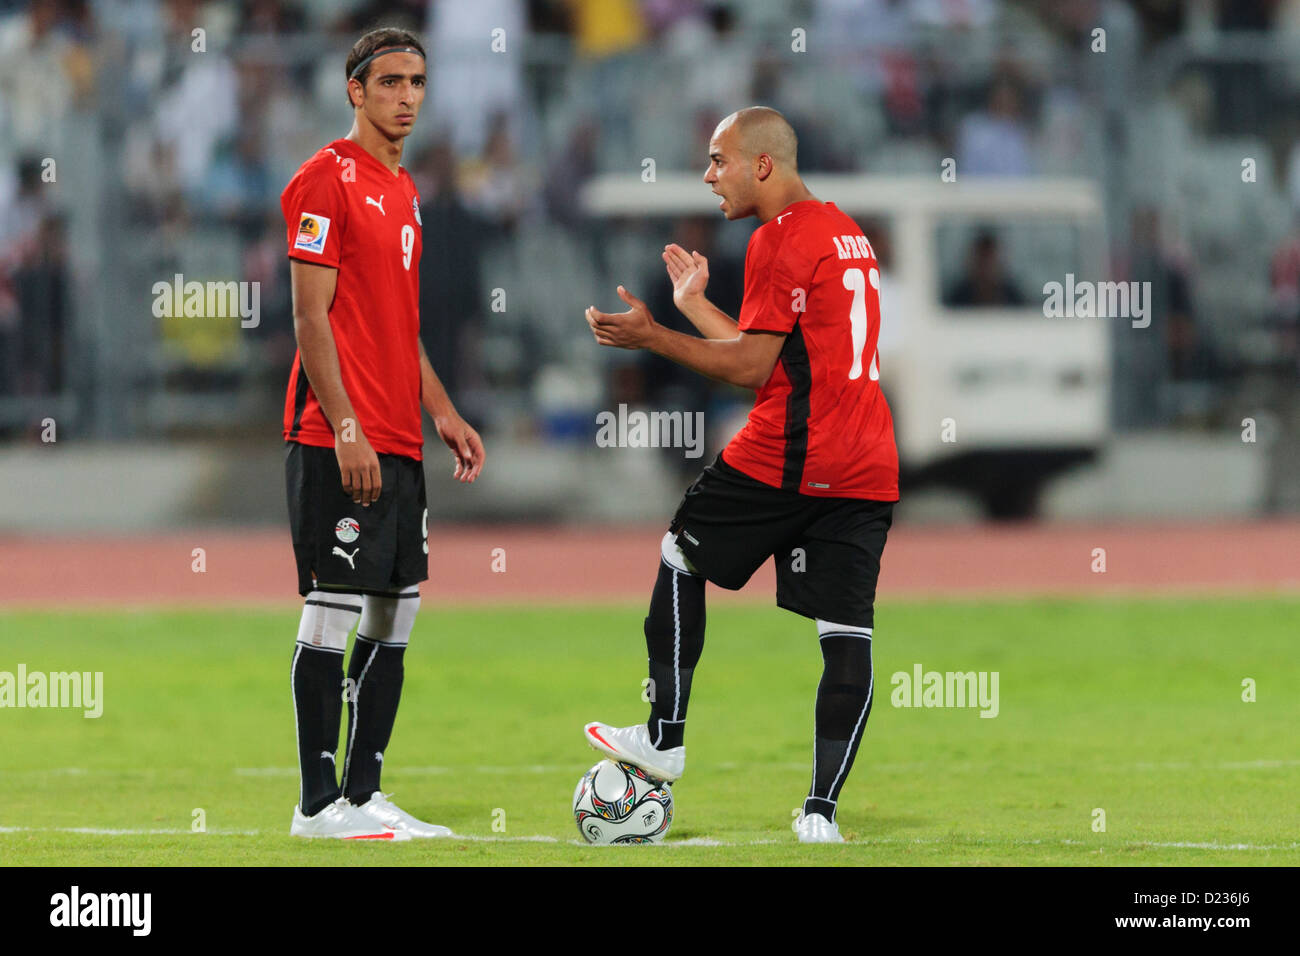 Mohamed Talaat (L) and Afroto (R) of Egypt prepare to kick off the second half of the opening match of the FIFA U-20 World Cup. Stock Photo